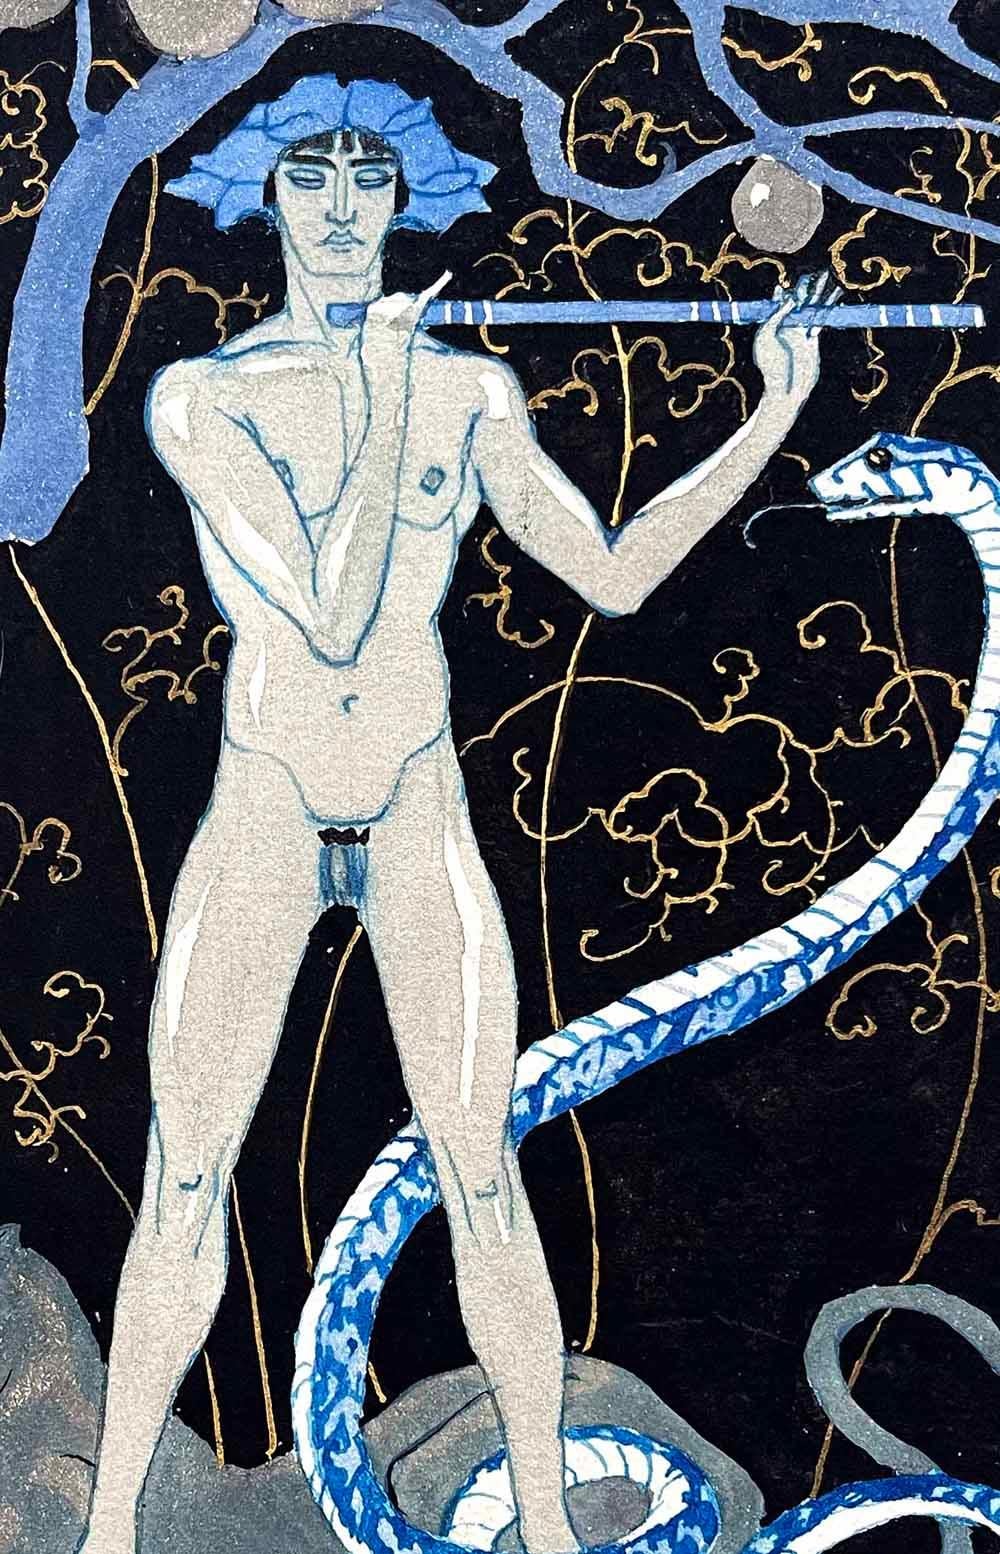 A brilliant reminder of how early the Art Deco style we know today emerged in France, this vividly-painted depiction of Mowgli, the protagonist of Rudyard Kipling's 